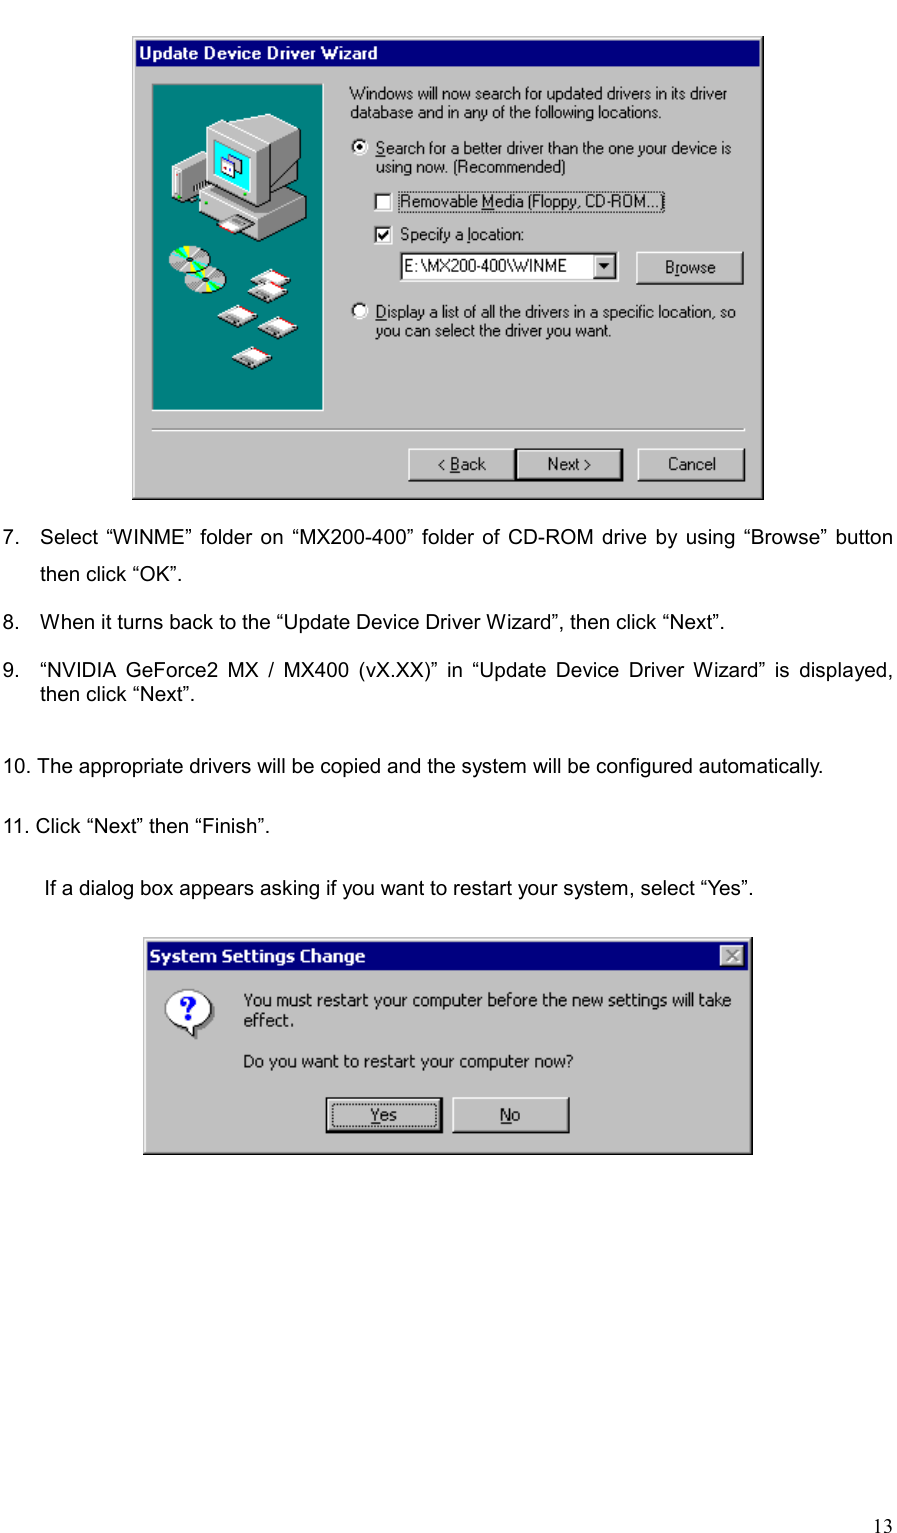     13  7.  Select “WINME” folder on “MX200-400” folder of CD-ROM drive by using “Browse” button then click “OK”.  8.  When it turns back to the “Update Device Driver Wizard”, then click “Next”.  9.  “NVIDIA GeForce2 MX / MX400 (vX.XX)” in “Update Device Driver Wizard” is displayed, then click “Next”.   10. The appropriate drivers will be copied and the system will be configured automatically.  11. Click “Next” then “Finish”.    If a dialog box appears asking if you want to restart your system, select “Yes”.   